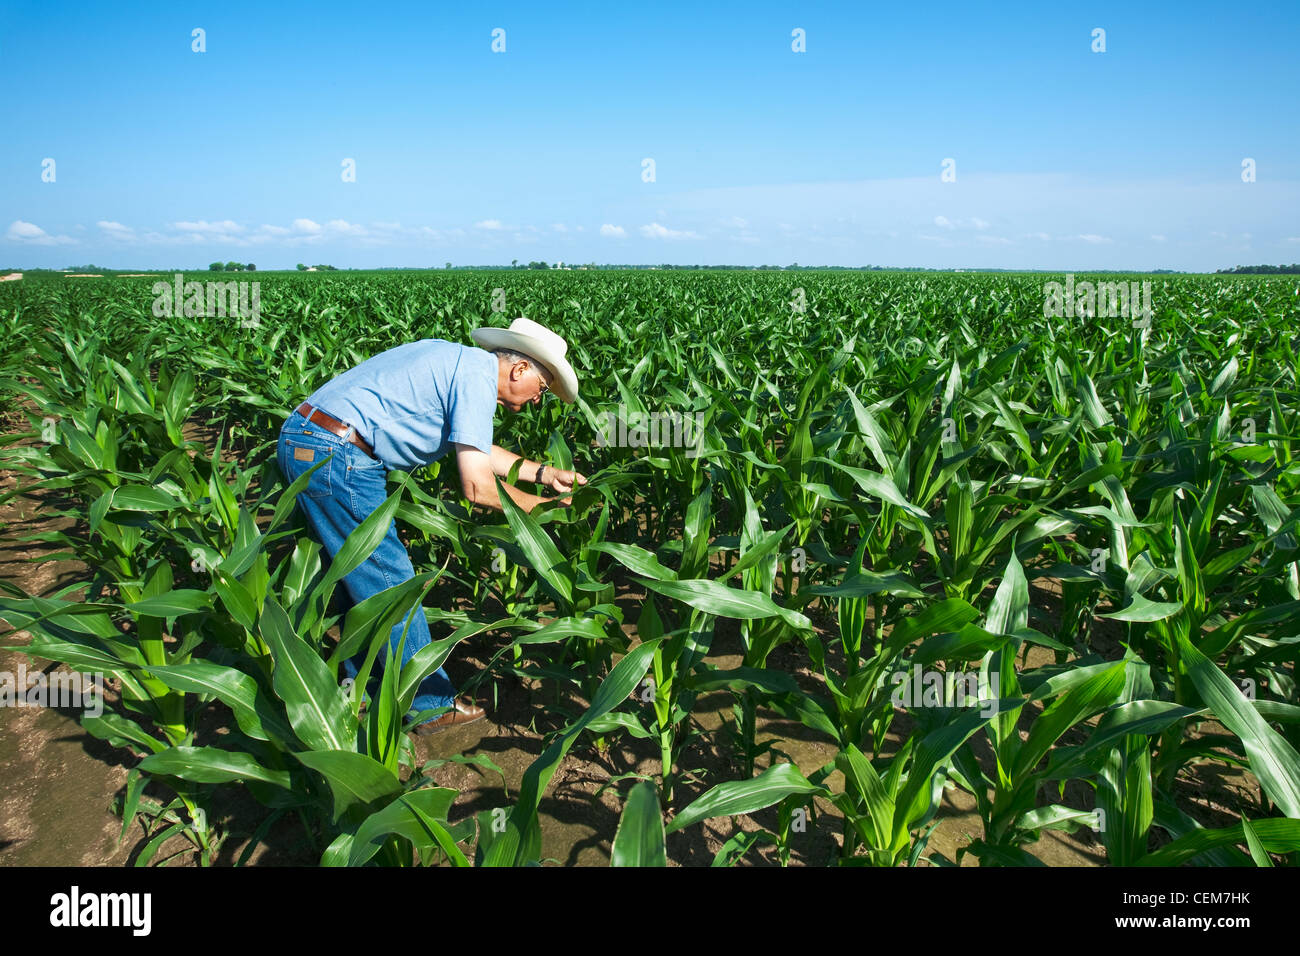 Agriculture - A farmer (grower) examines mid growth corn plants for insect pests and growth progress / near England, Arkansas. Stock Photo